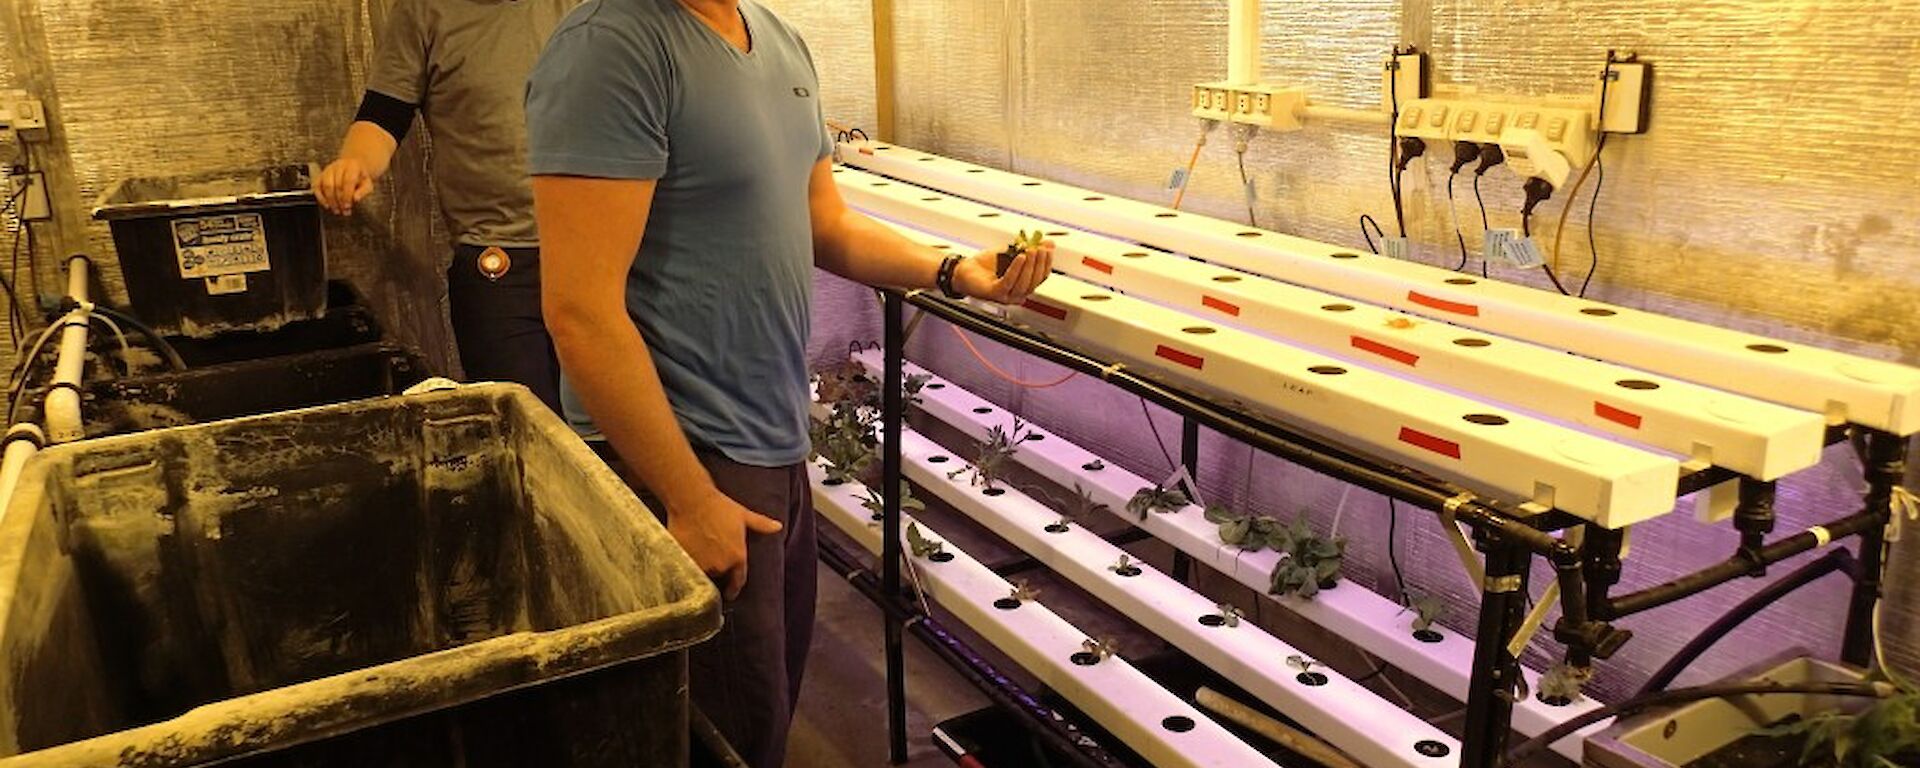 Aaron and Josh standing inside the hydroponics hut. There are two shelves with three rows of plastic hydroponic beds